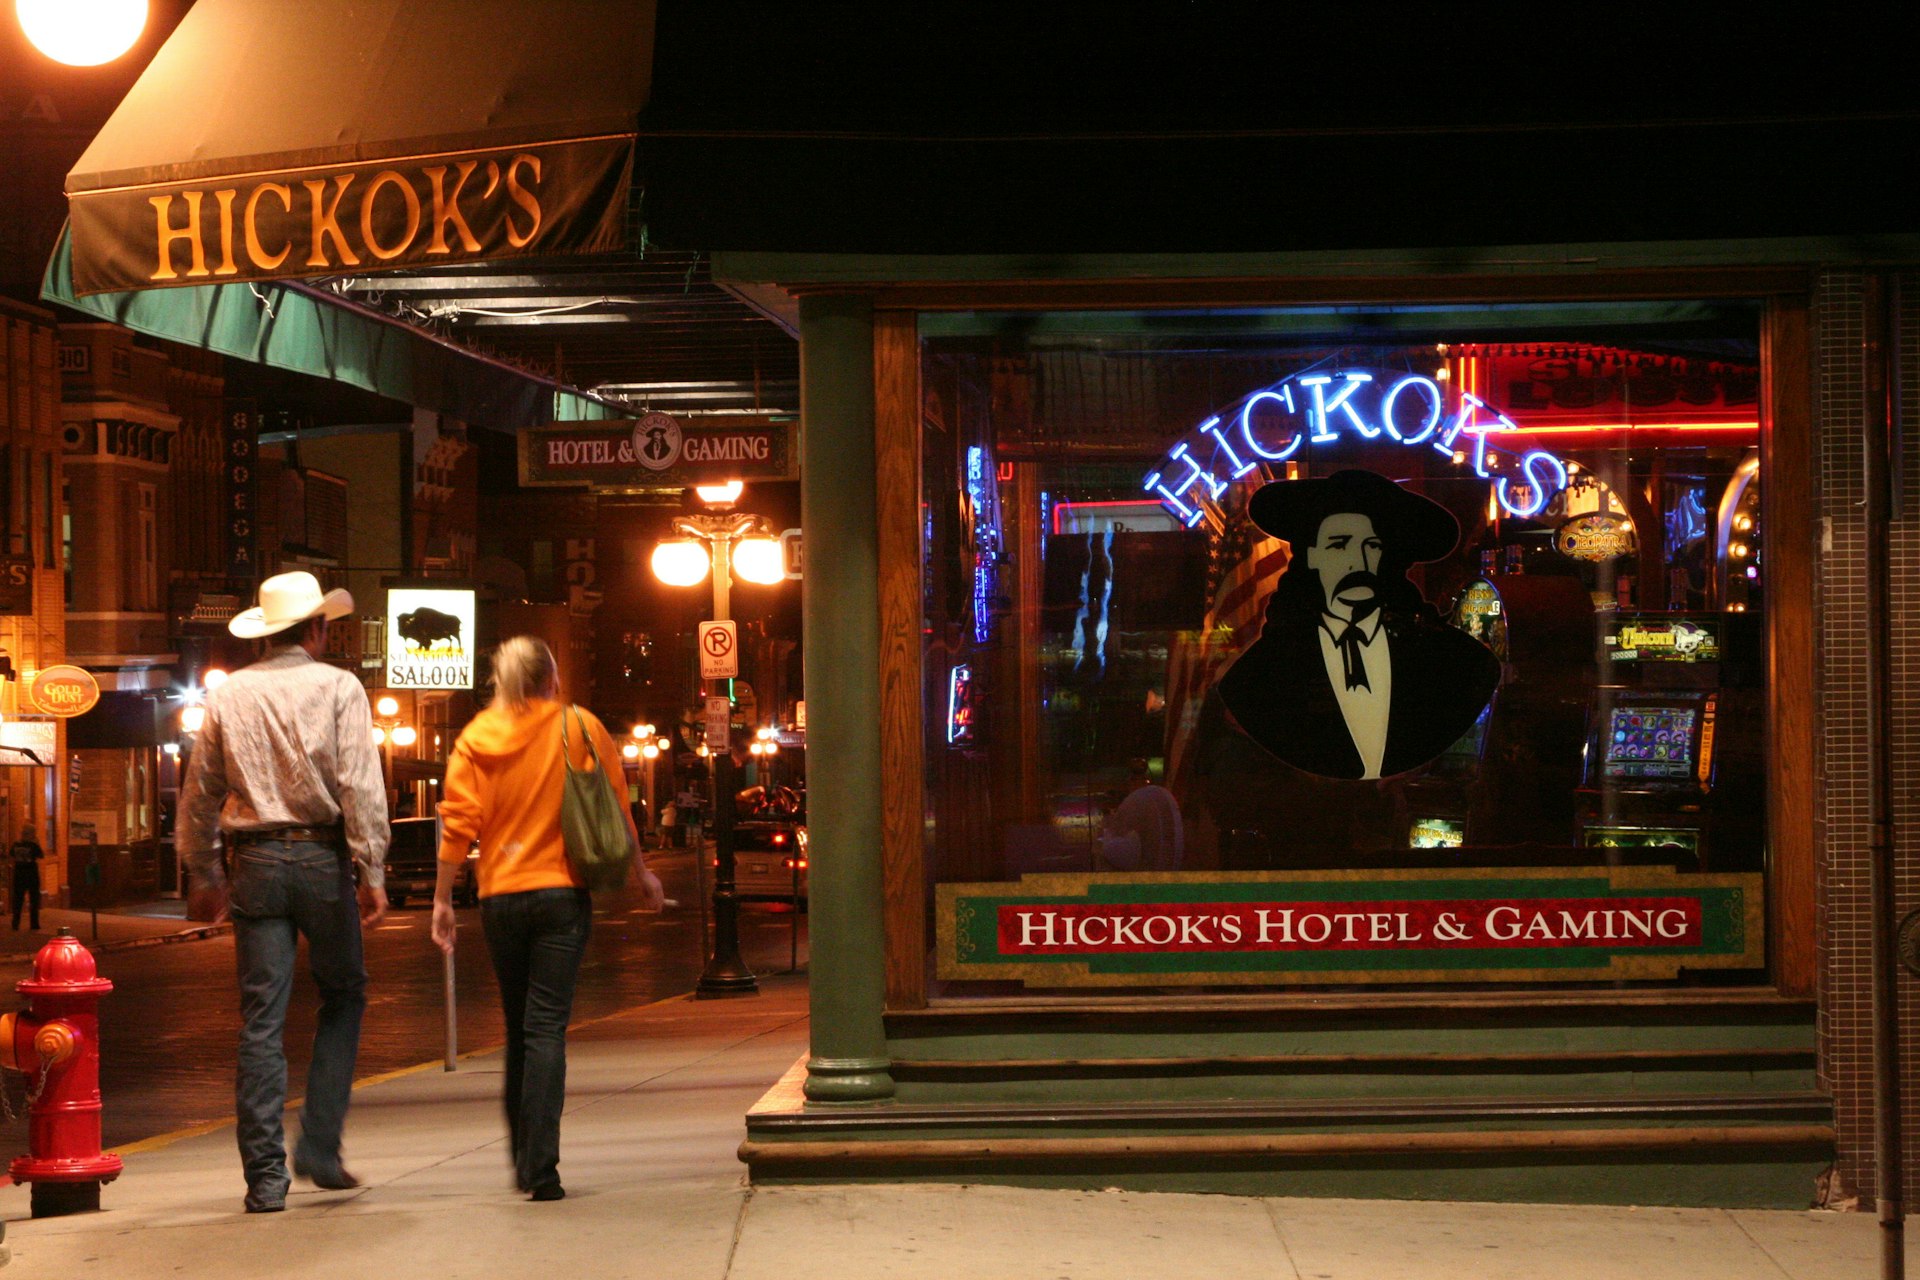 Deadwood was the home of Wild Bill Hickok, among other major Wild West figures. Image by Tribune News Service / Getty